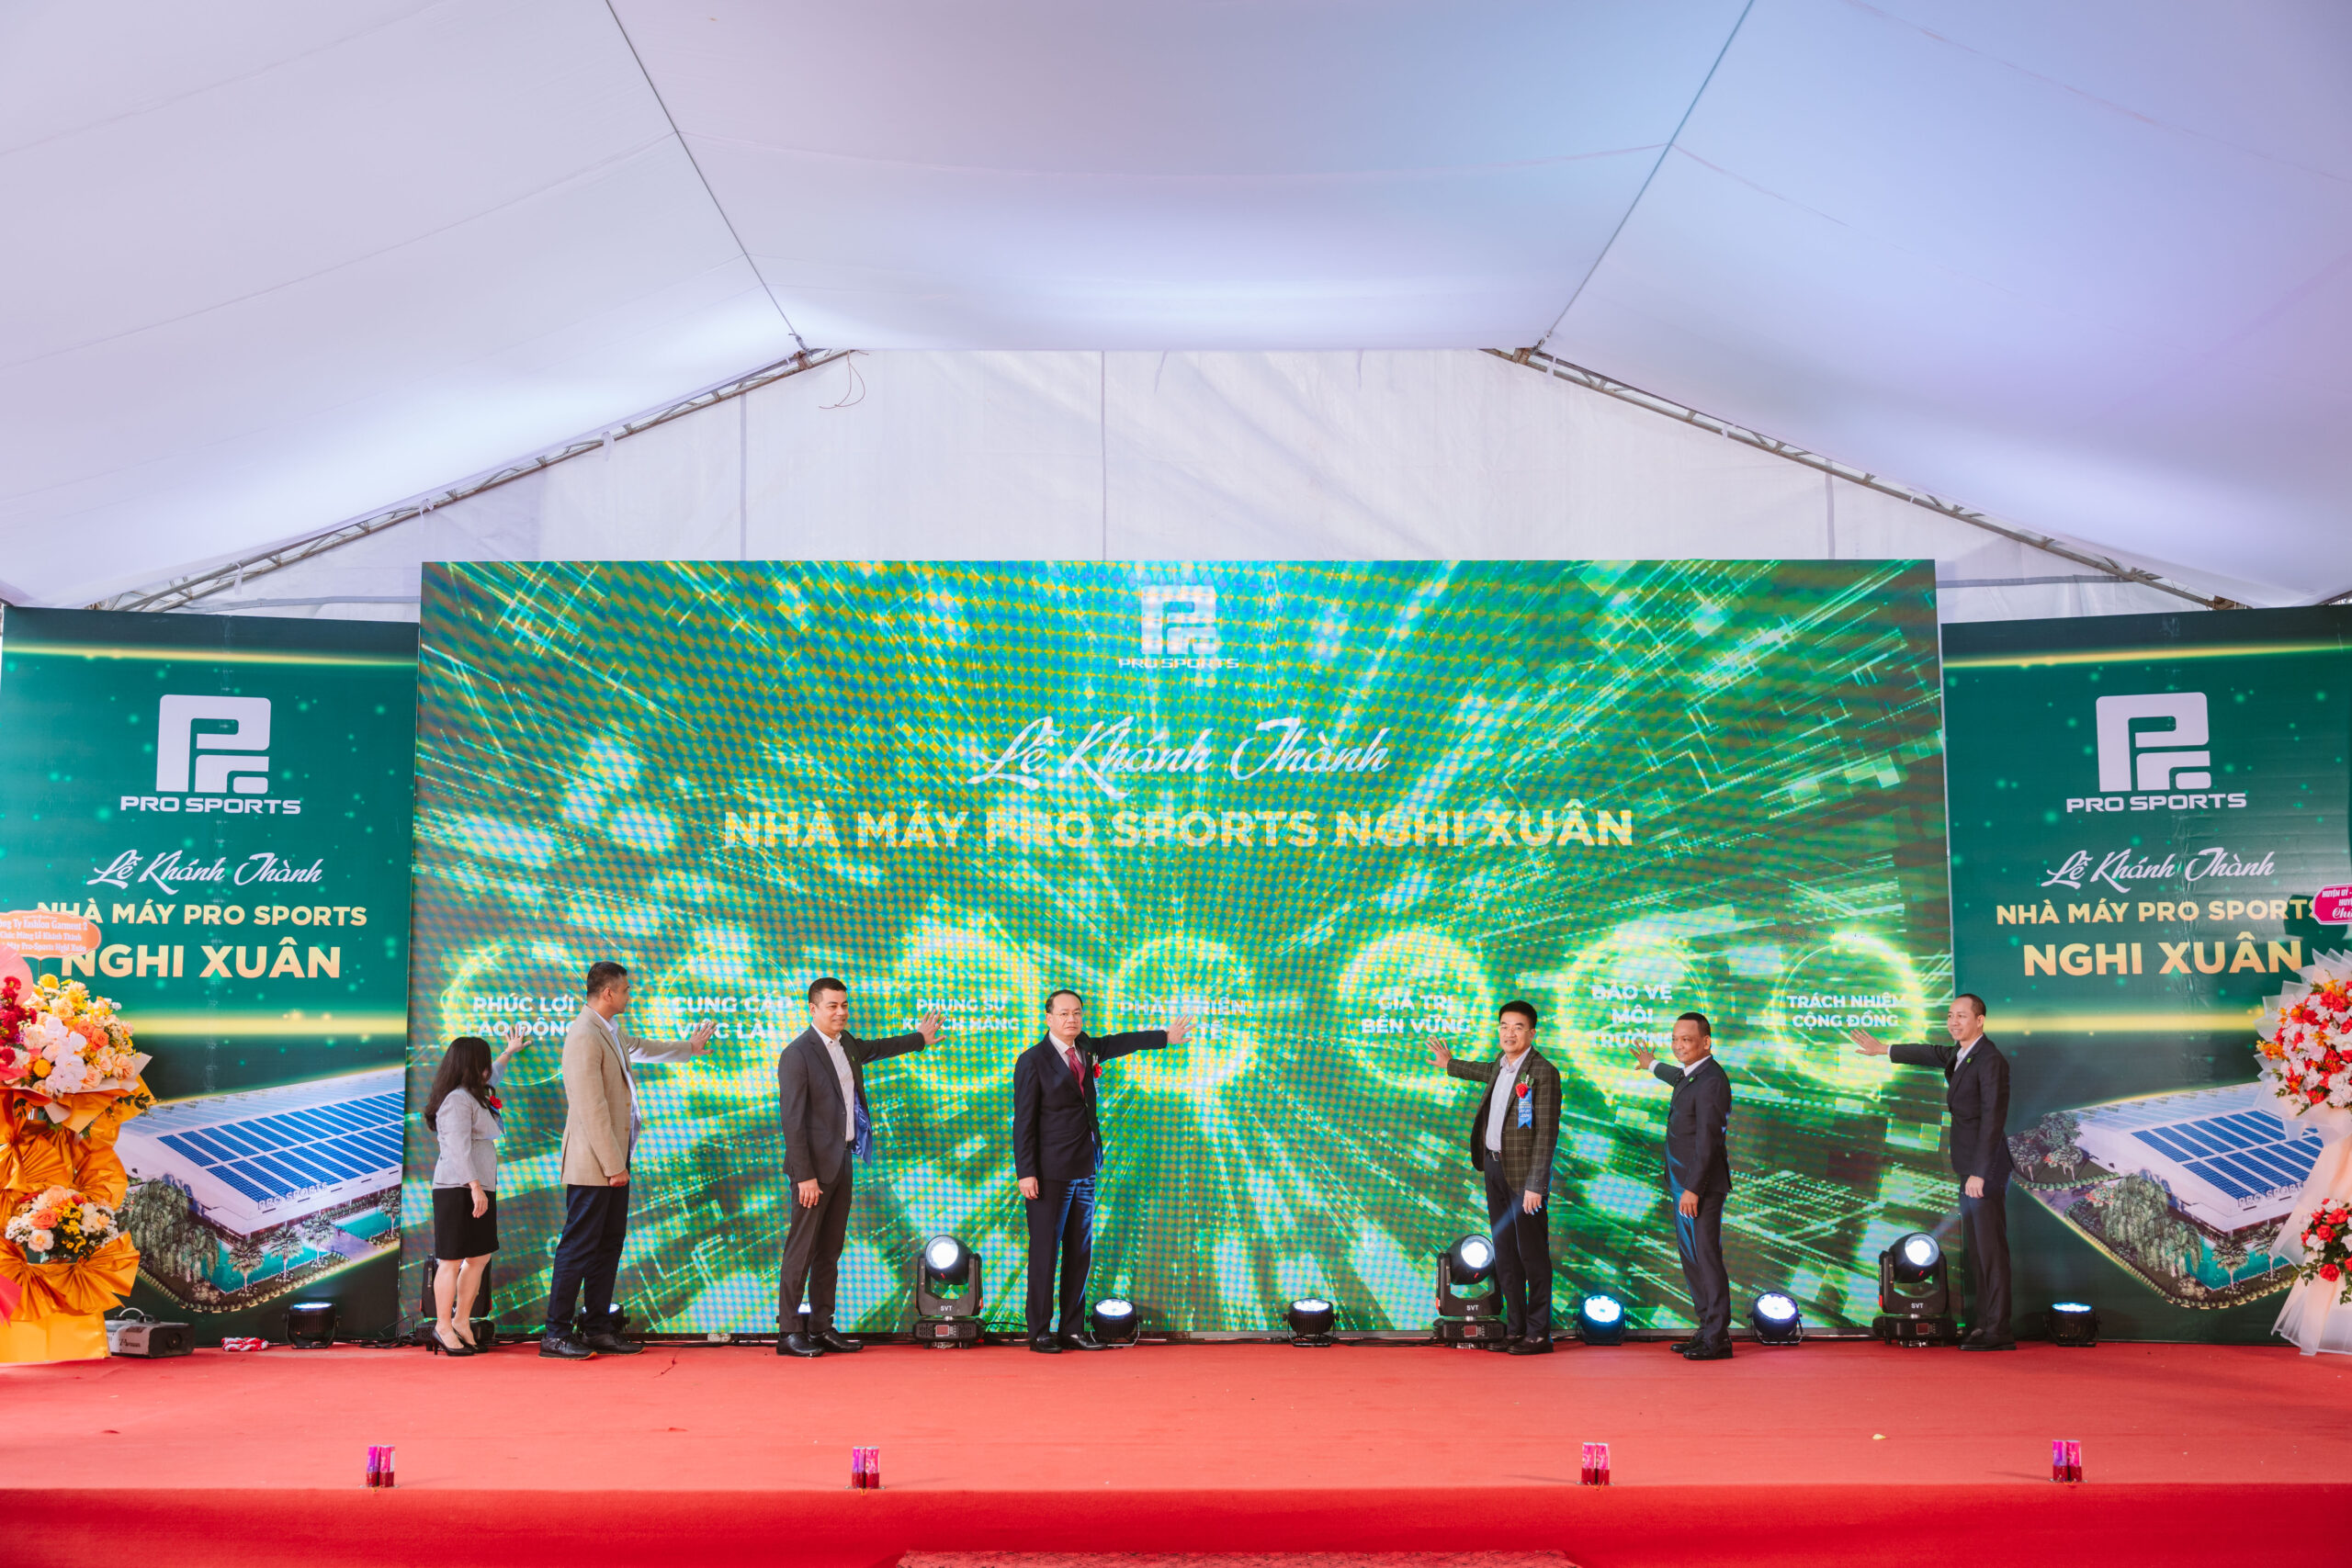 Grand Opening of Pro Sports Nghi Xuan Factory - The first Green Factory with the largest scale in Pro Sports' factory system